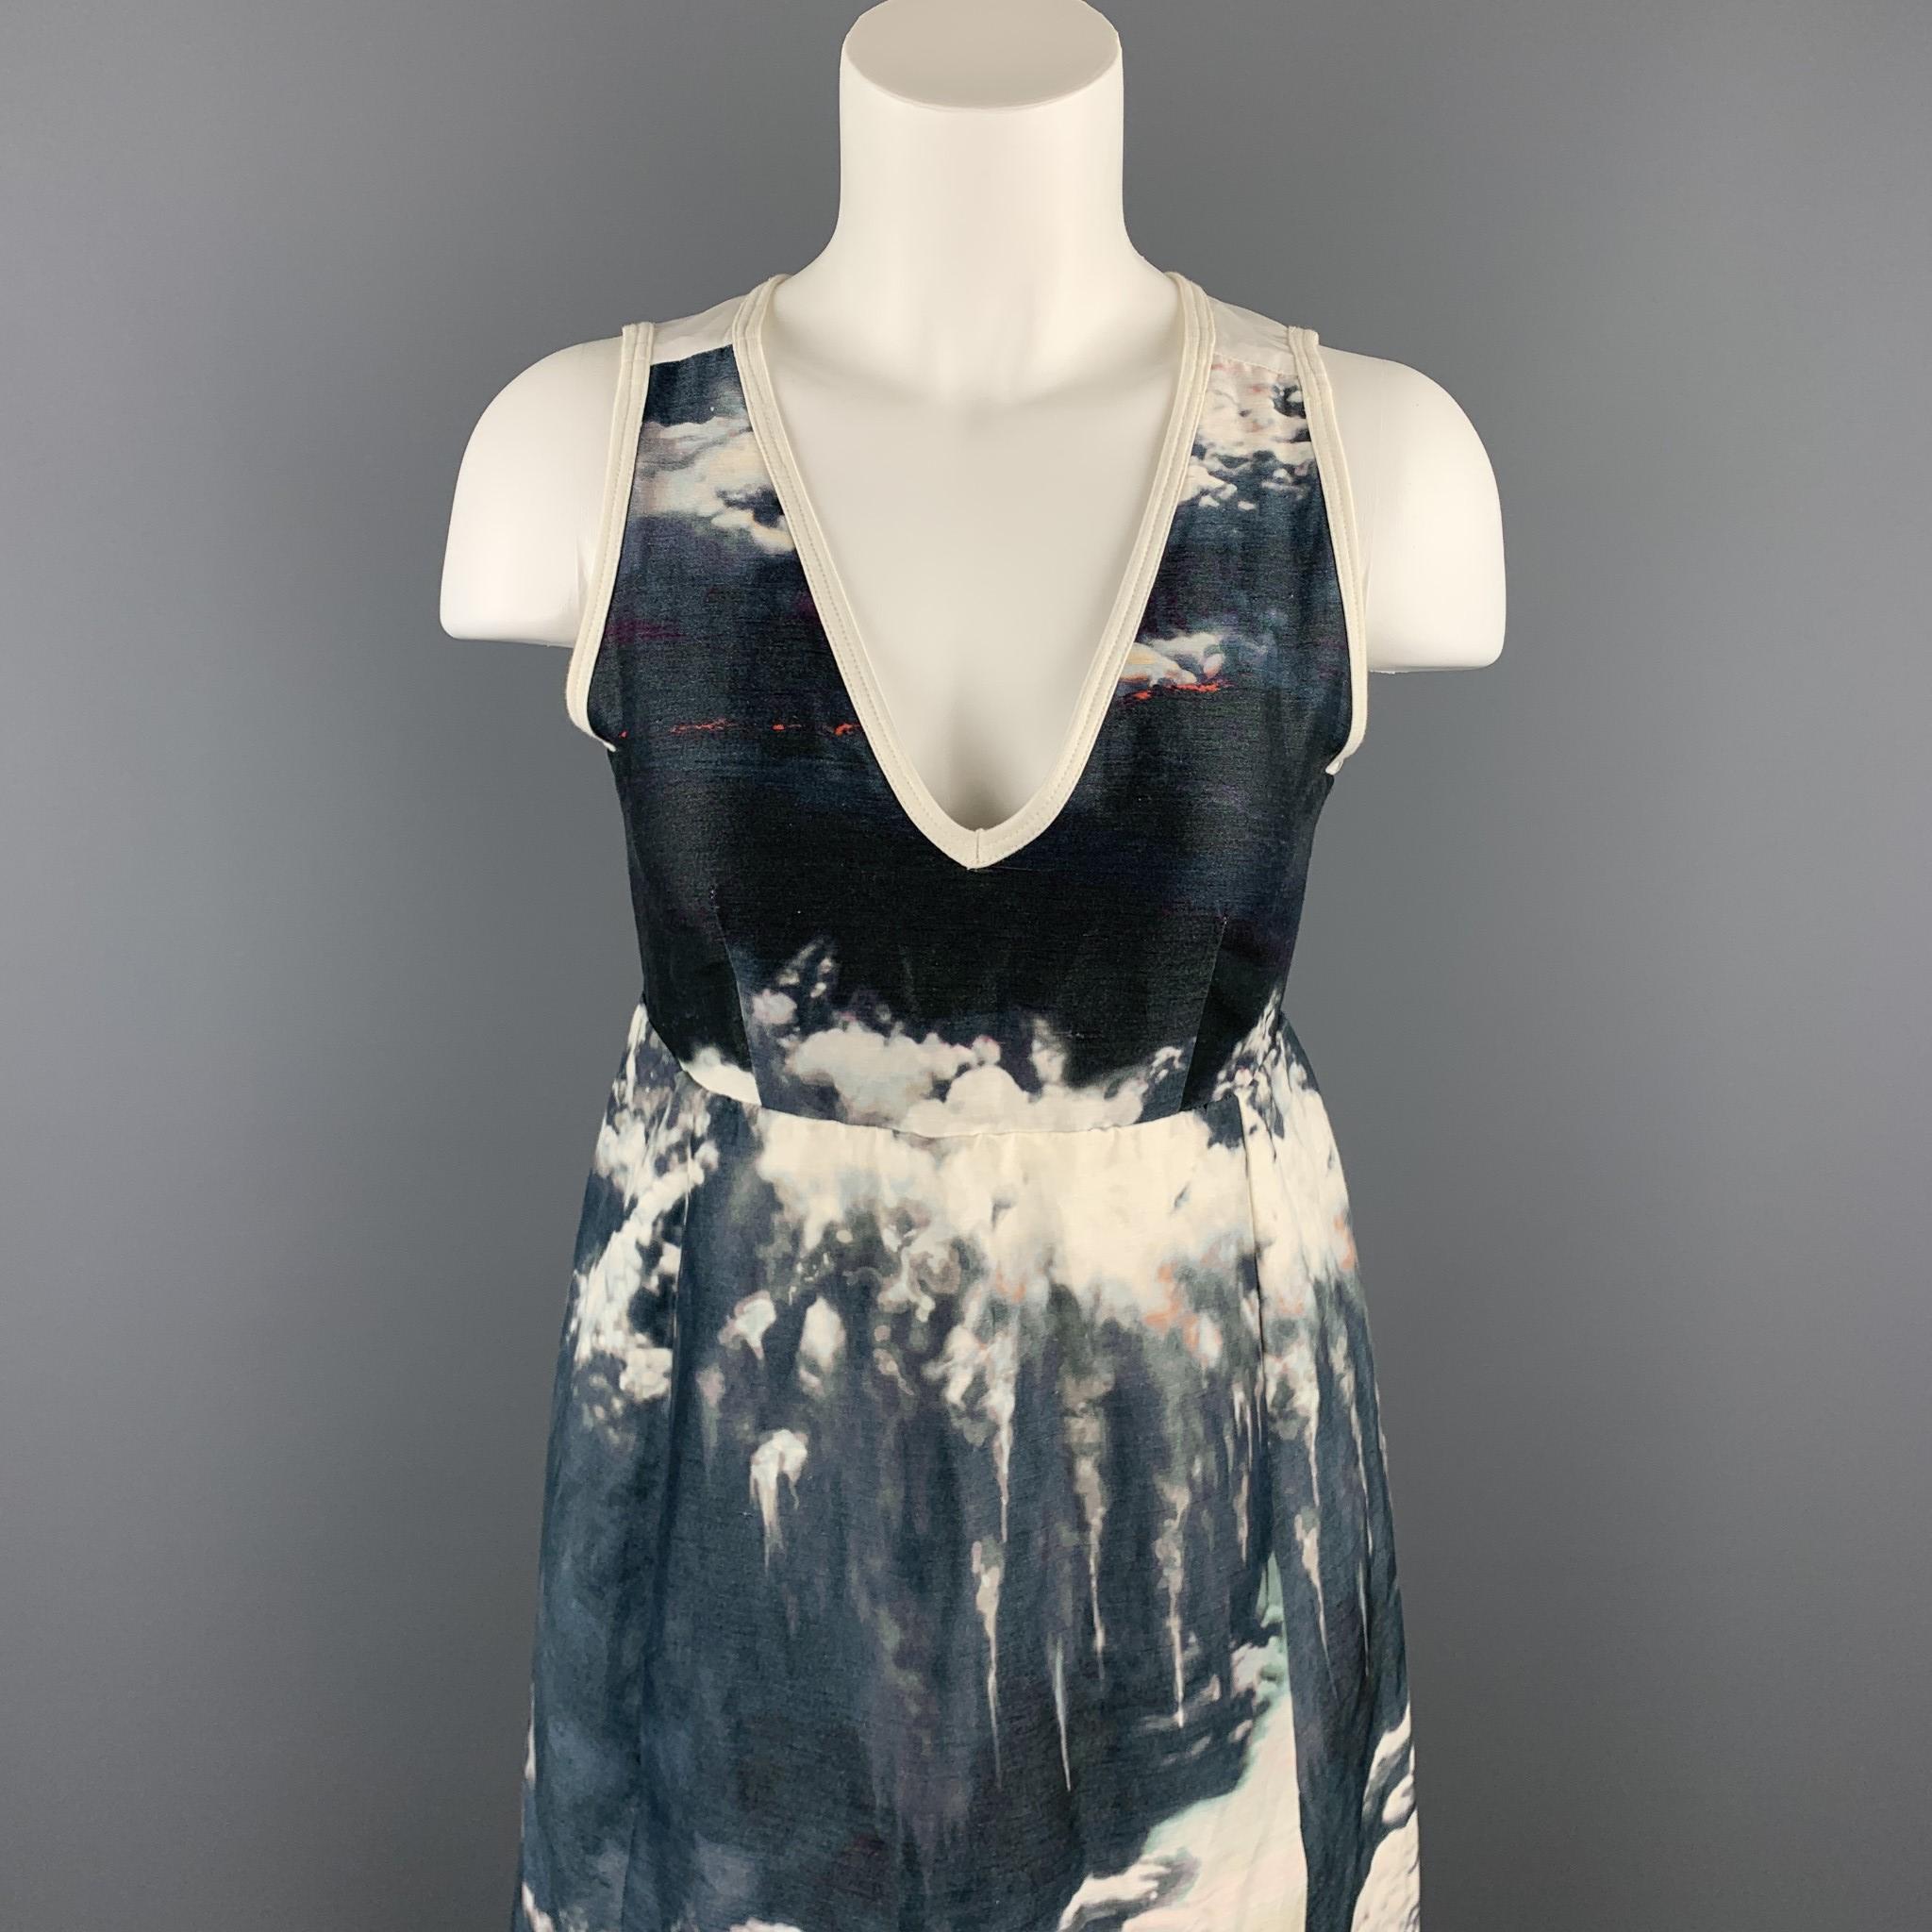 CARVEN cocktail dress comes in a whit linen / silk with a all over abstract print featuring a v-neck, front pockets, and a back zip up closure. 

Very Good Pre-Owned Condition.
Marked: 36

Measurements:

Shoulder: 11.5 in. 
Bust: 30 in. 
Waist: 28